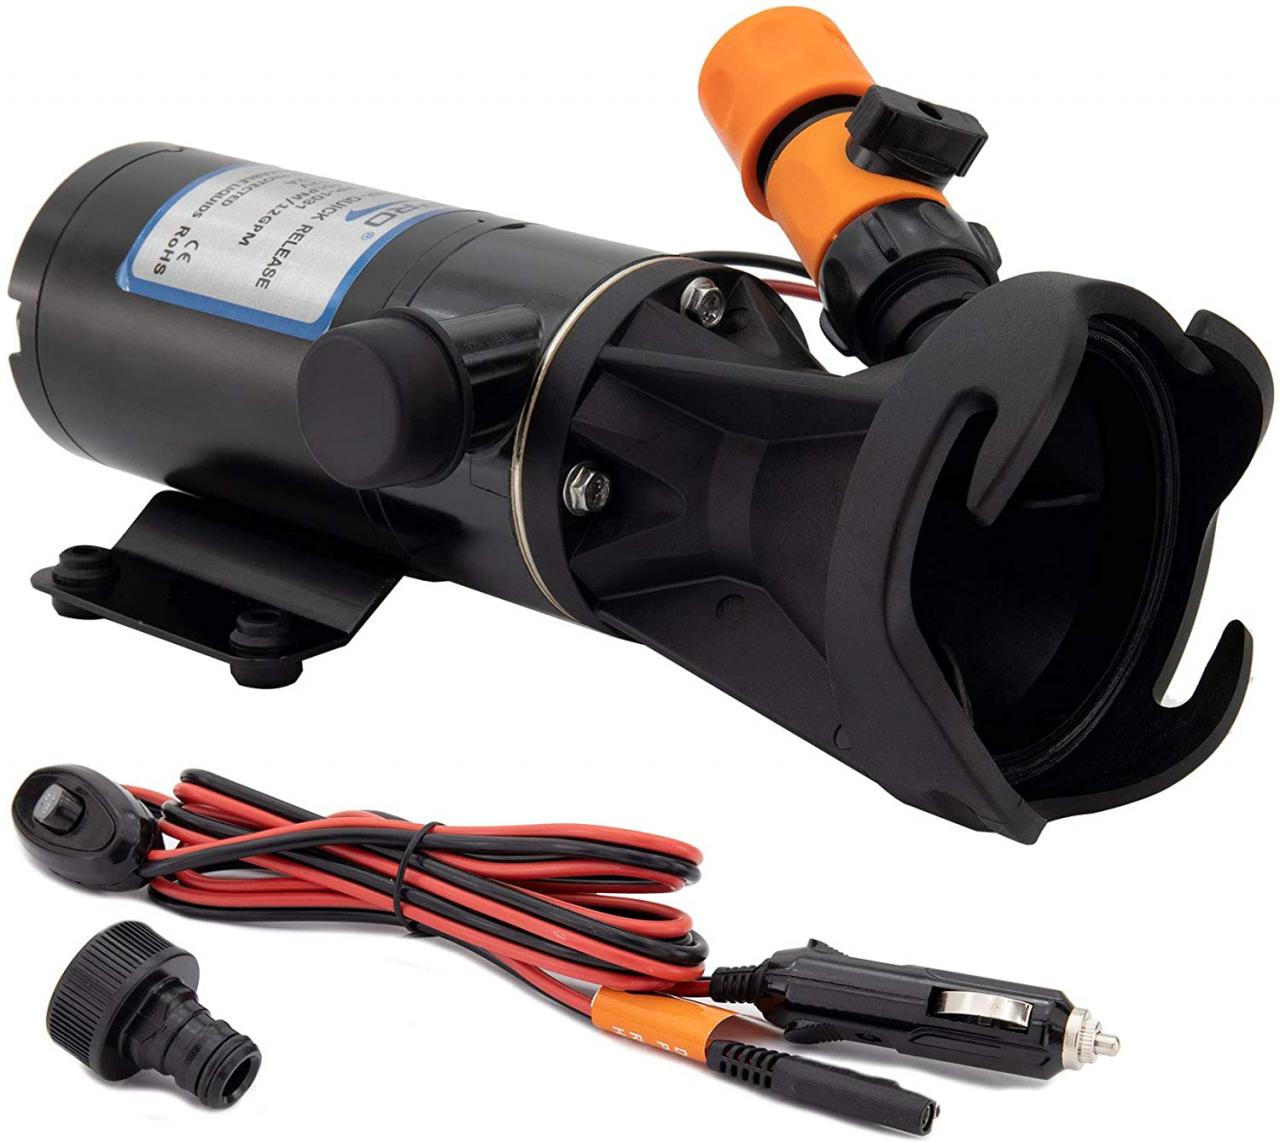 10 Best RV Macerator Pumps Reviewed and Rated in 2021 - RV Web